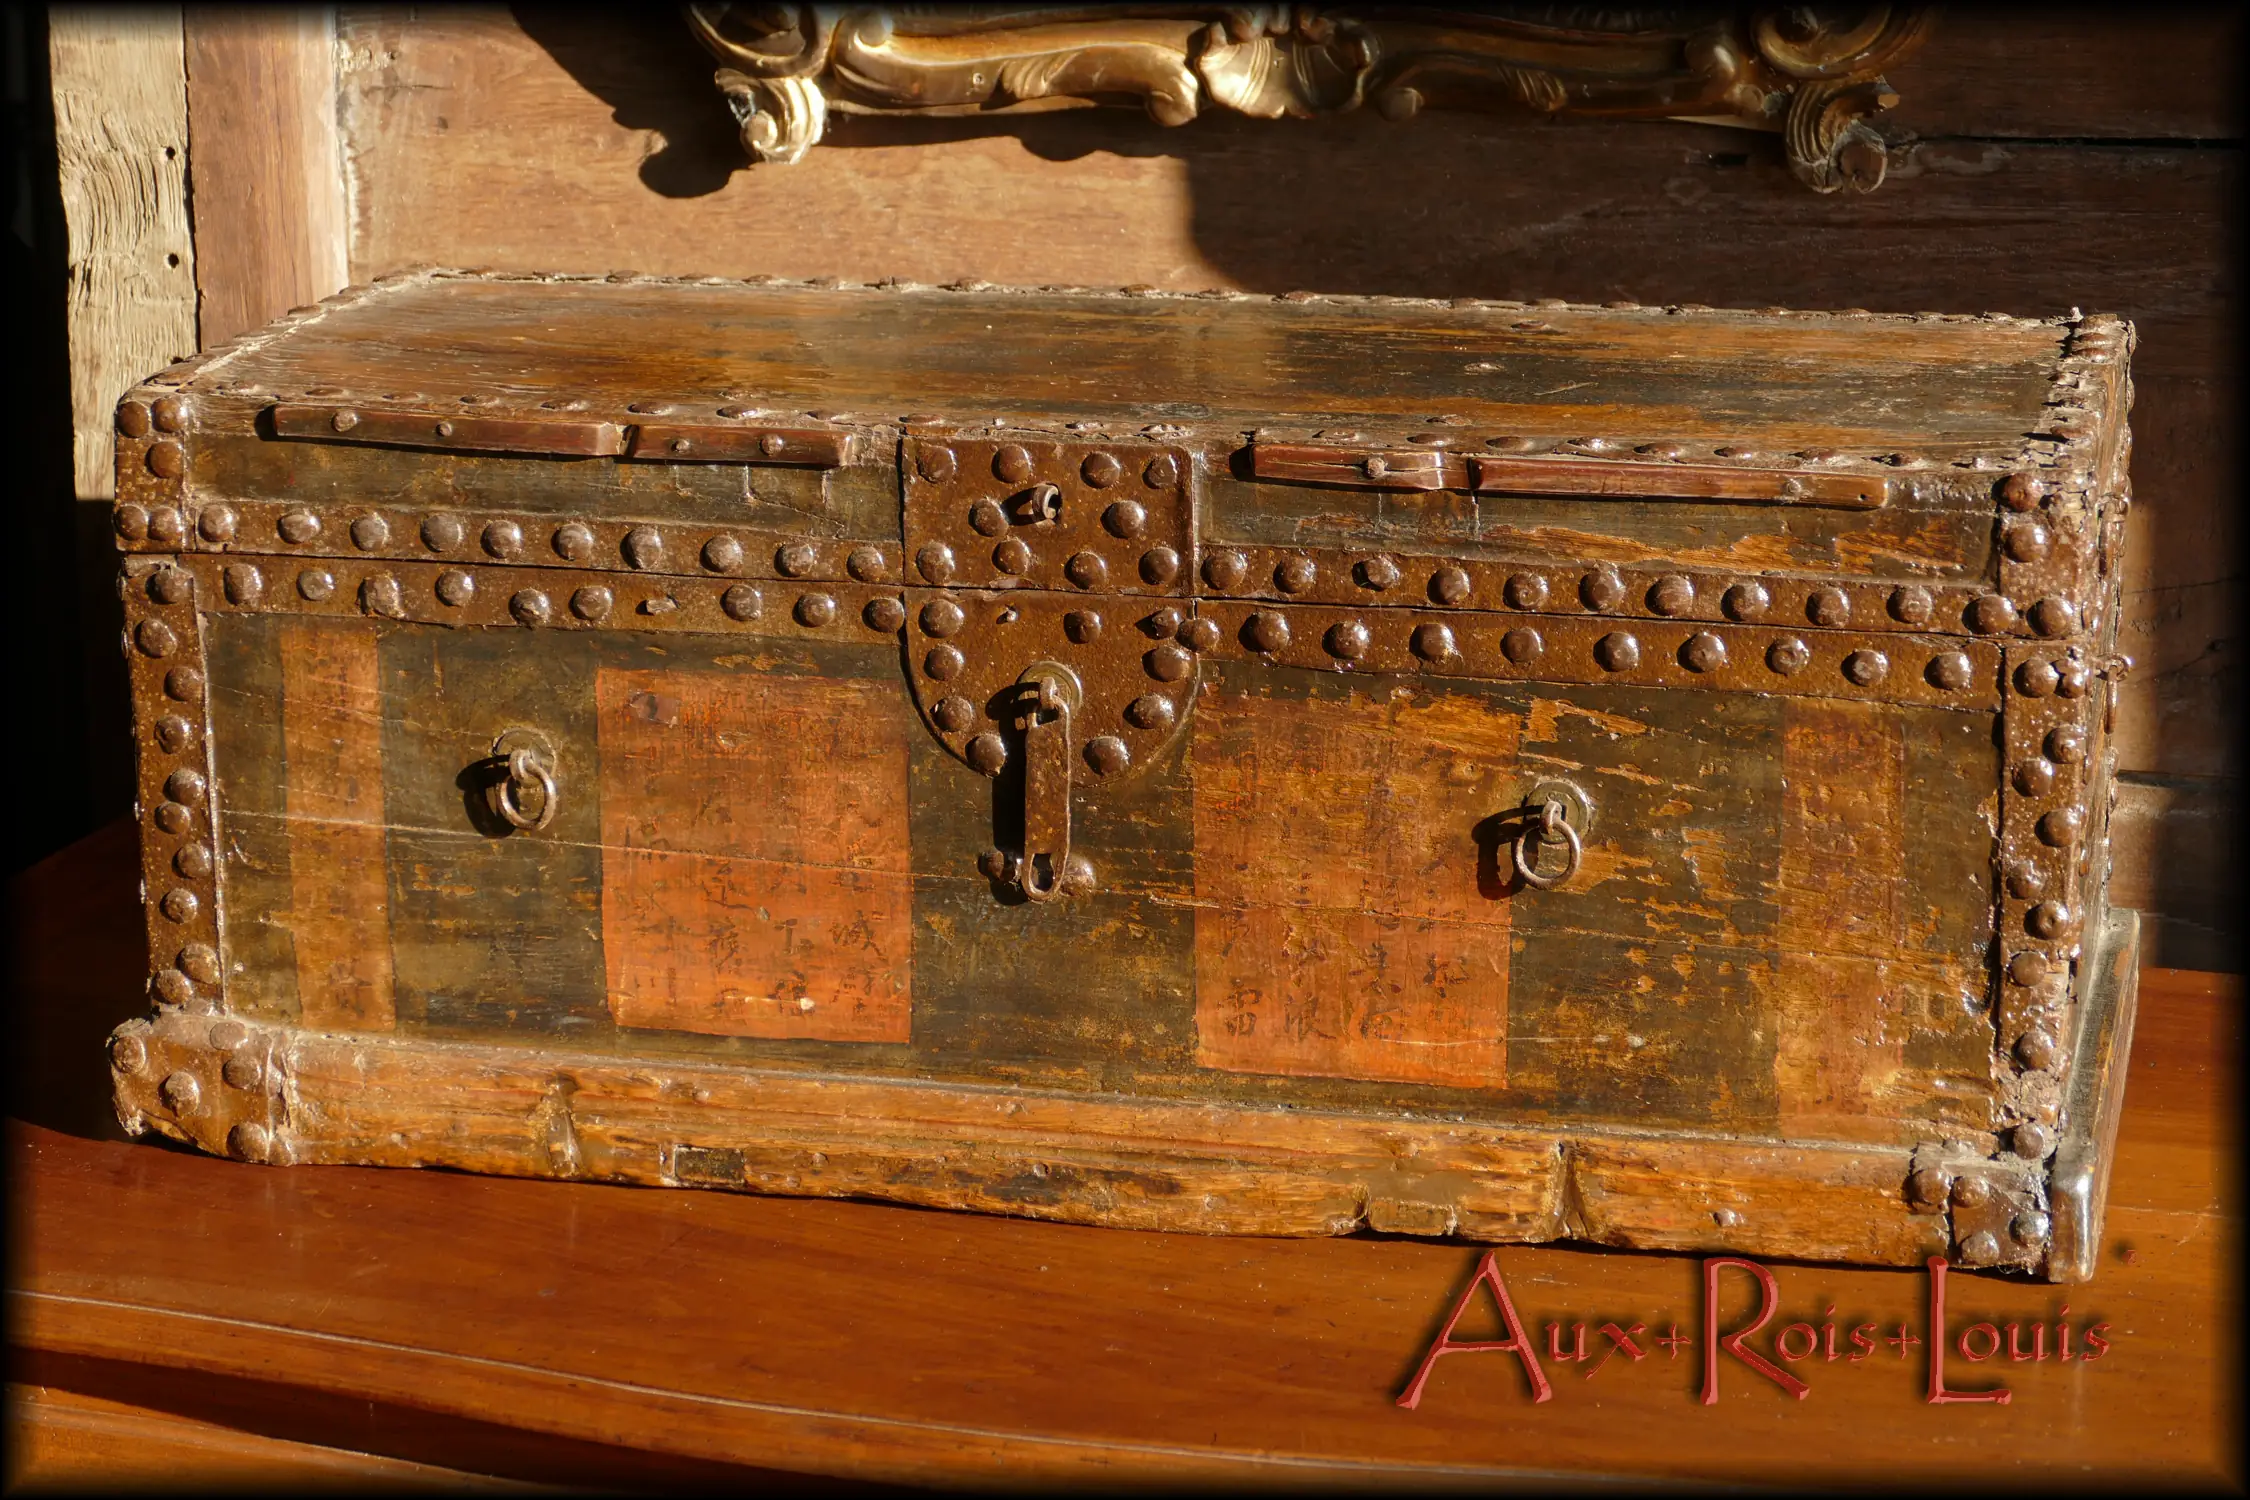 This studded travel trunk originates from the mountainous region of Hubei, also known as the Province of a Thousand Lakes, situated in central China. It was the cradle of one of the oldest Chinese civilizations, the Erligang culture. The ochre and green hues that surface are original.